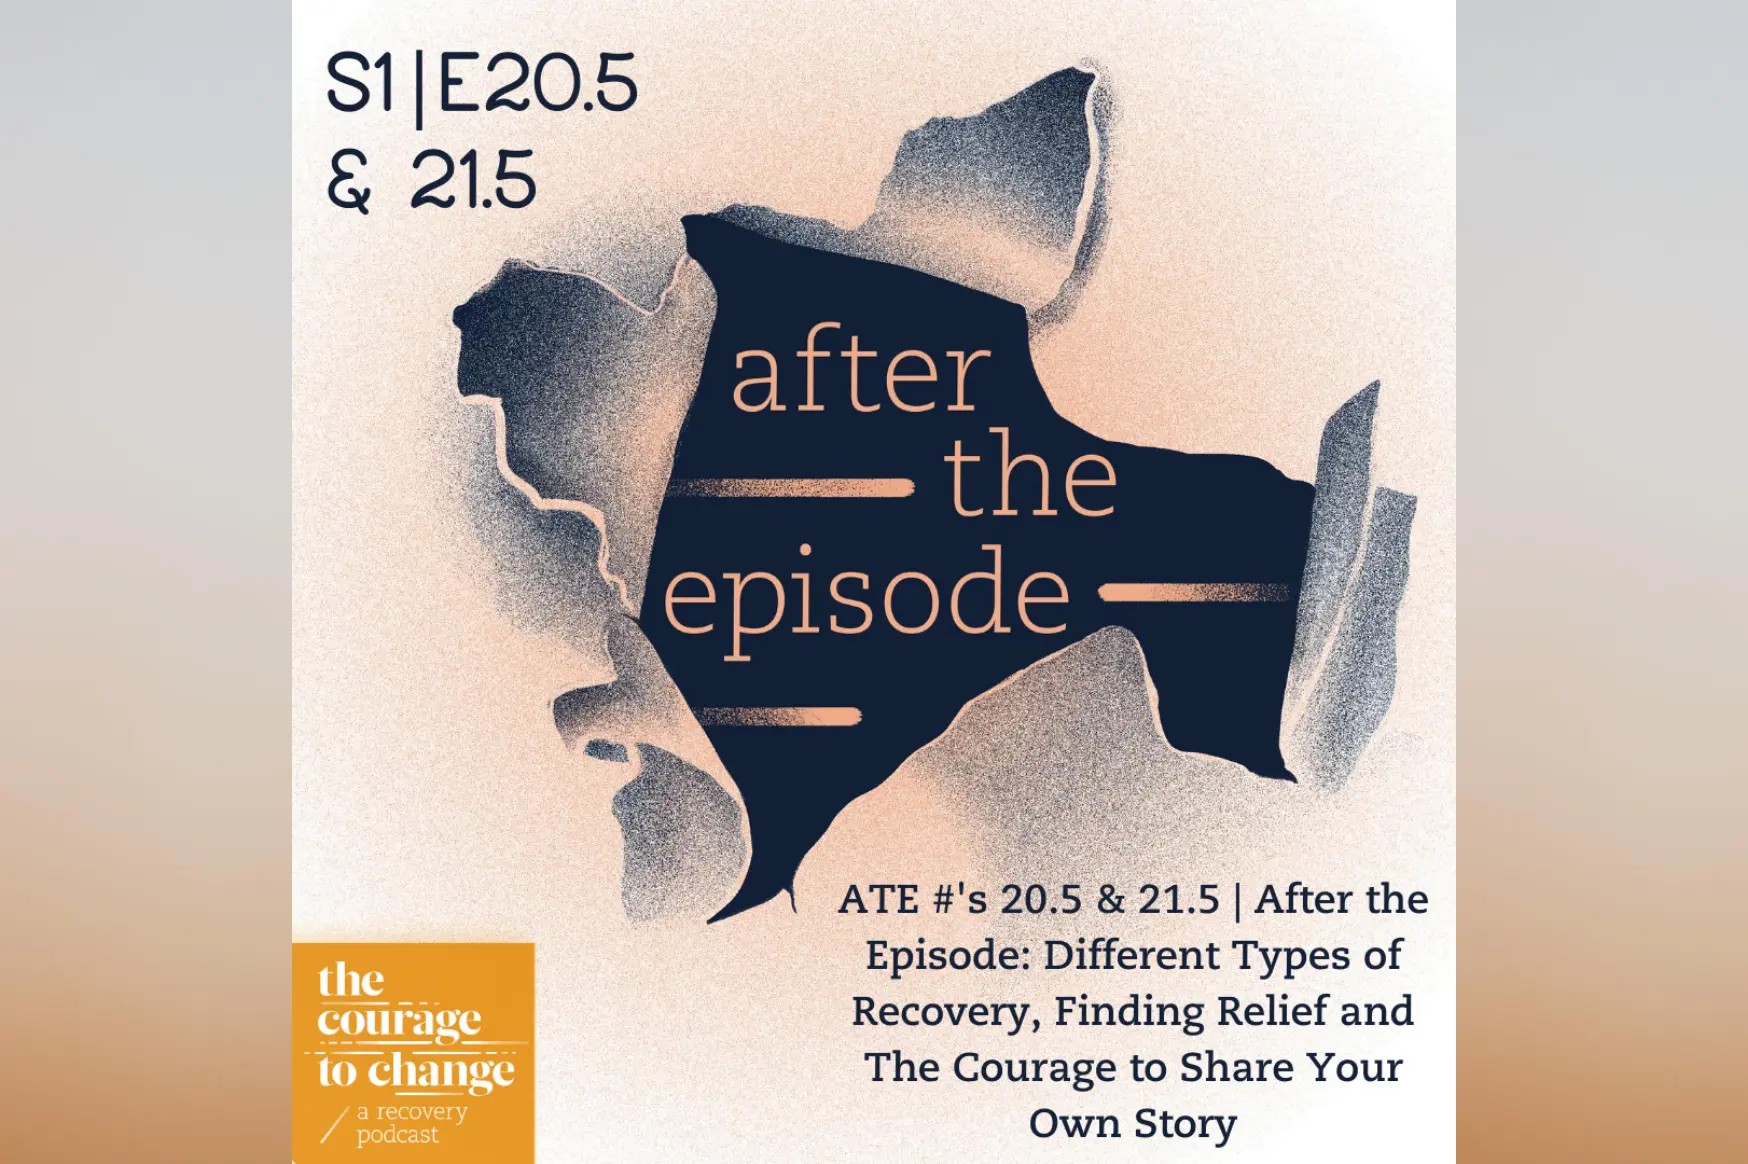 # 20.5 & 21.5 - After the Episode